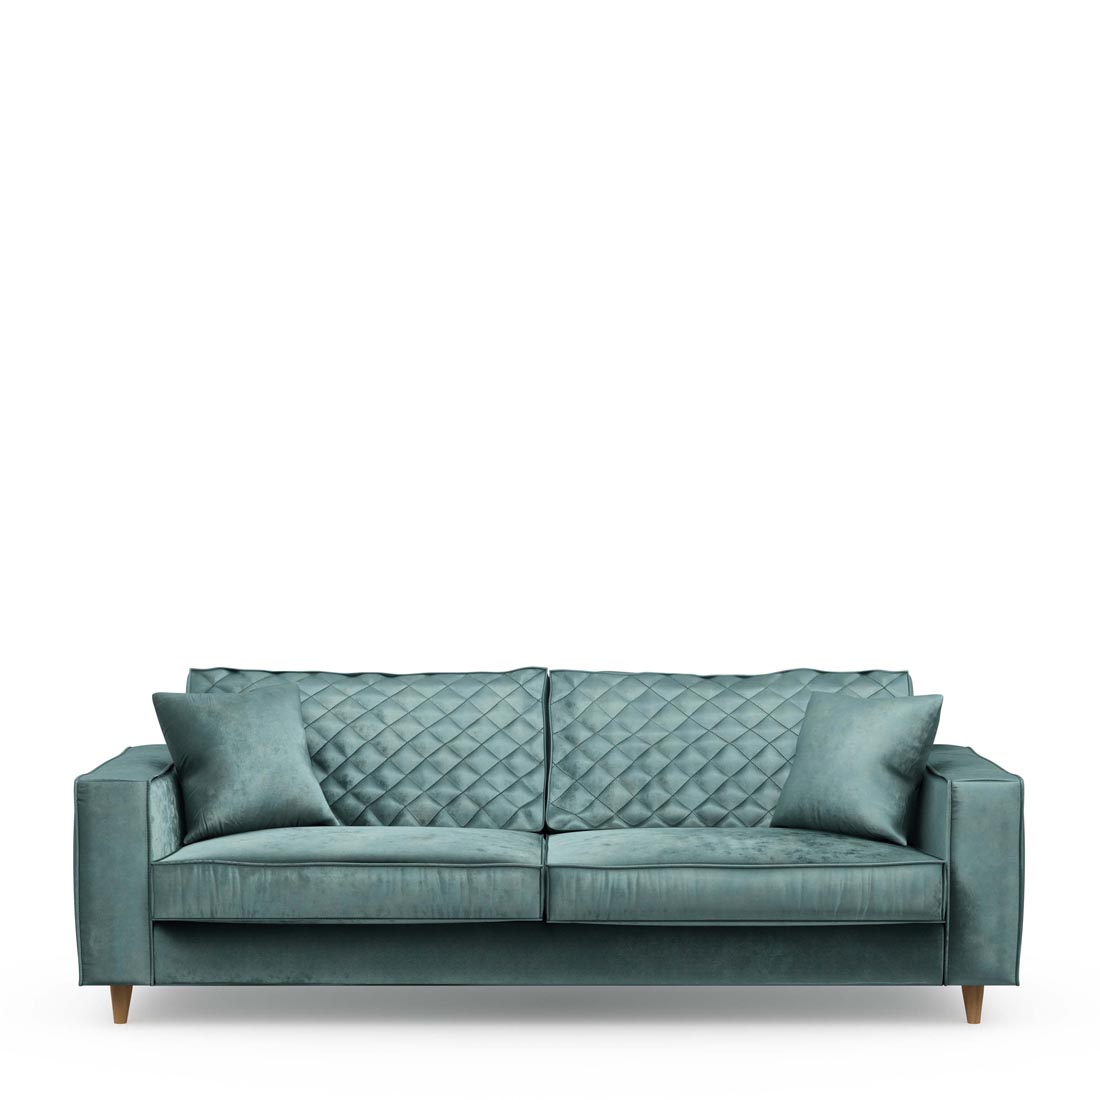 Riviera Maison - Kendall  Sofa  3,5s   - Mineral Blue